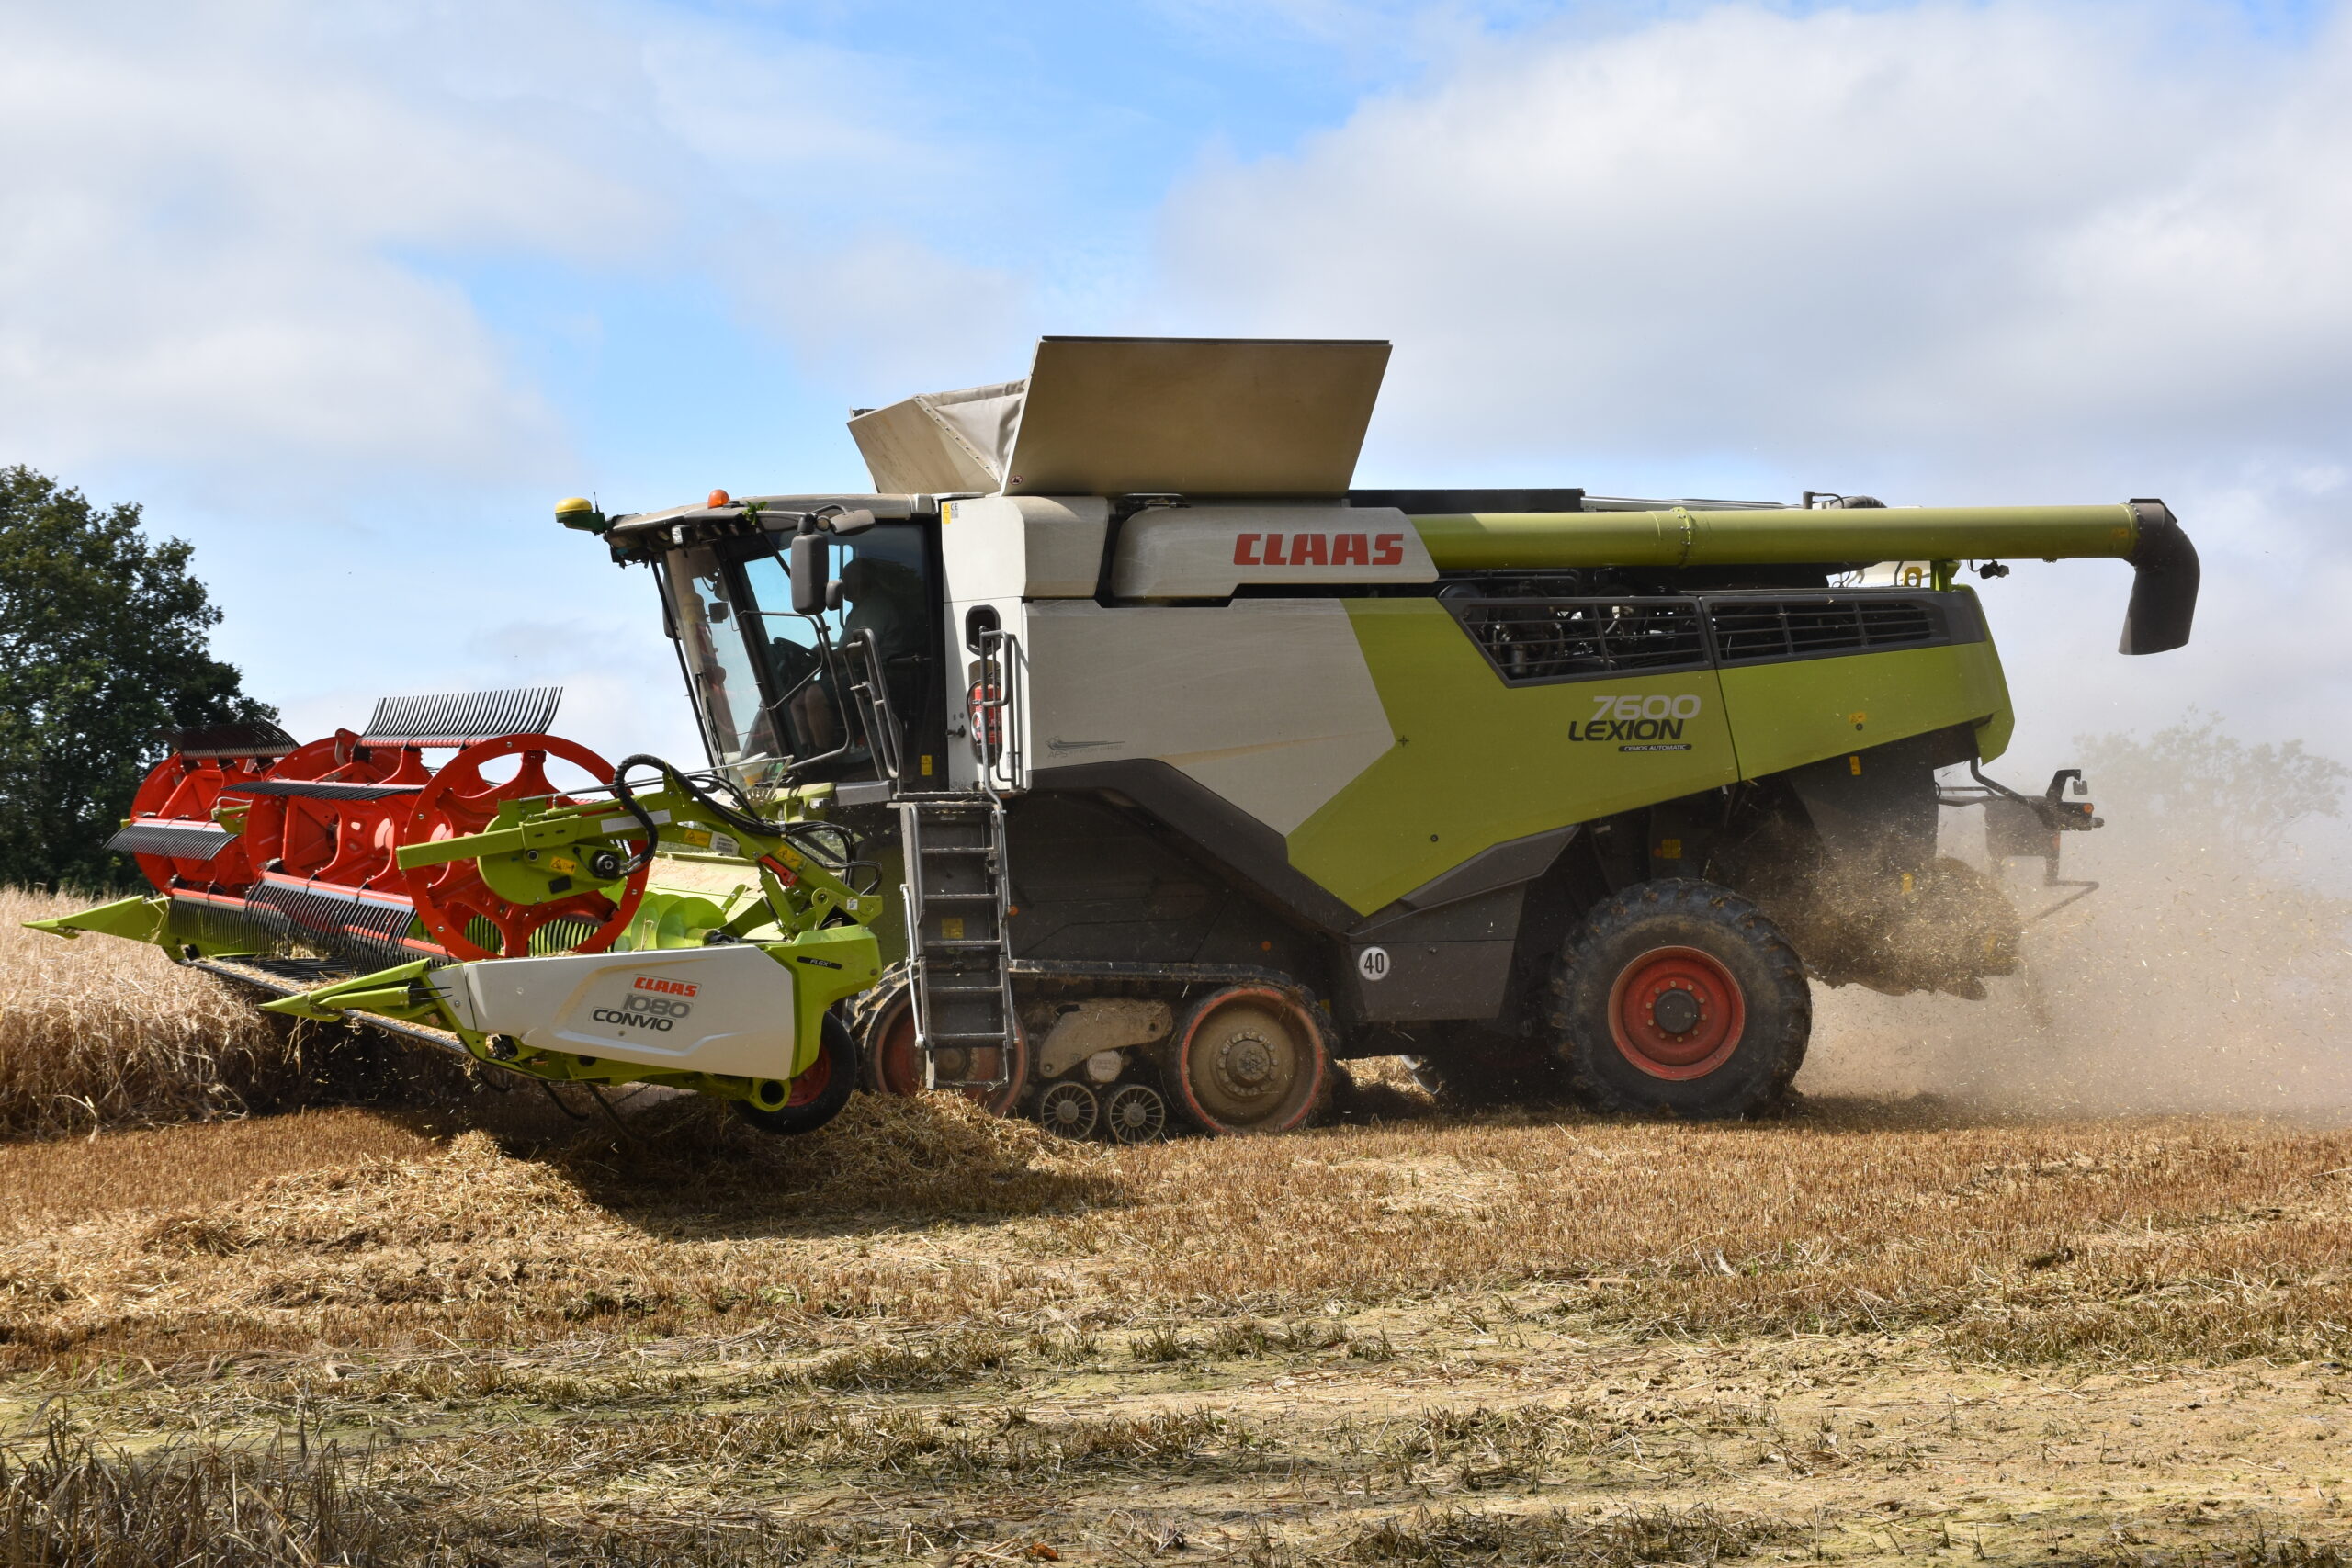 Claas Lexion combine harvester turning on the headland